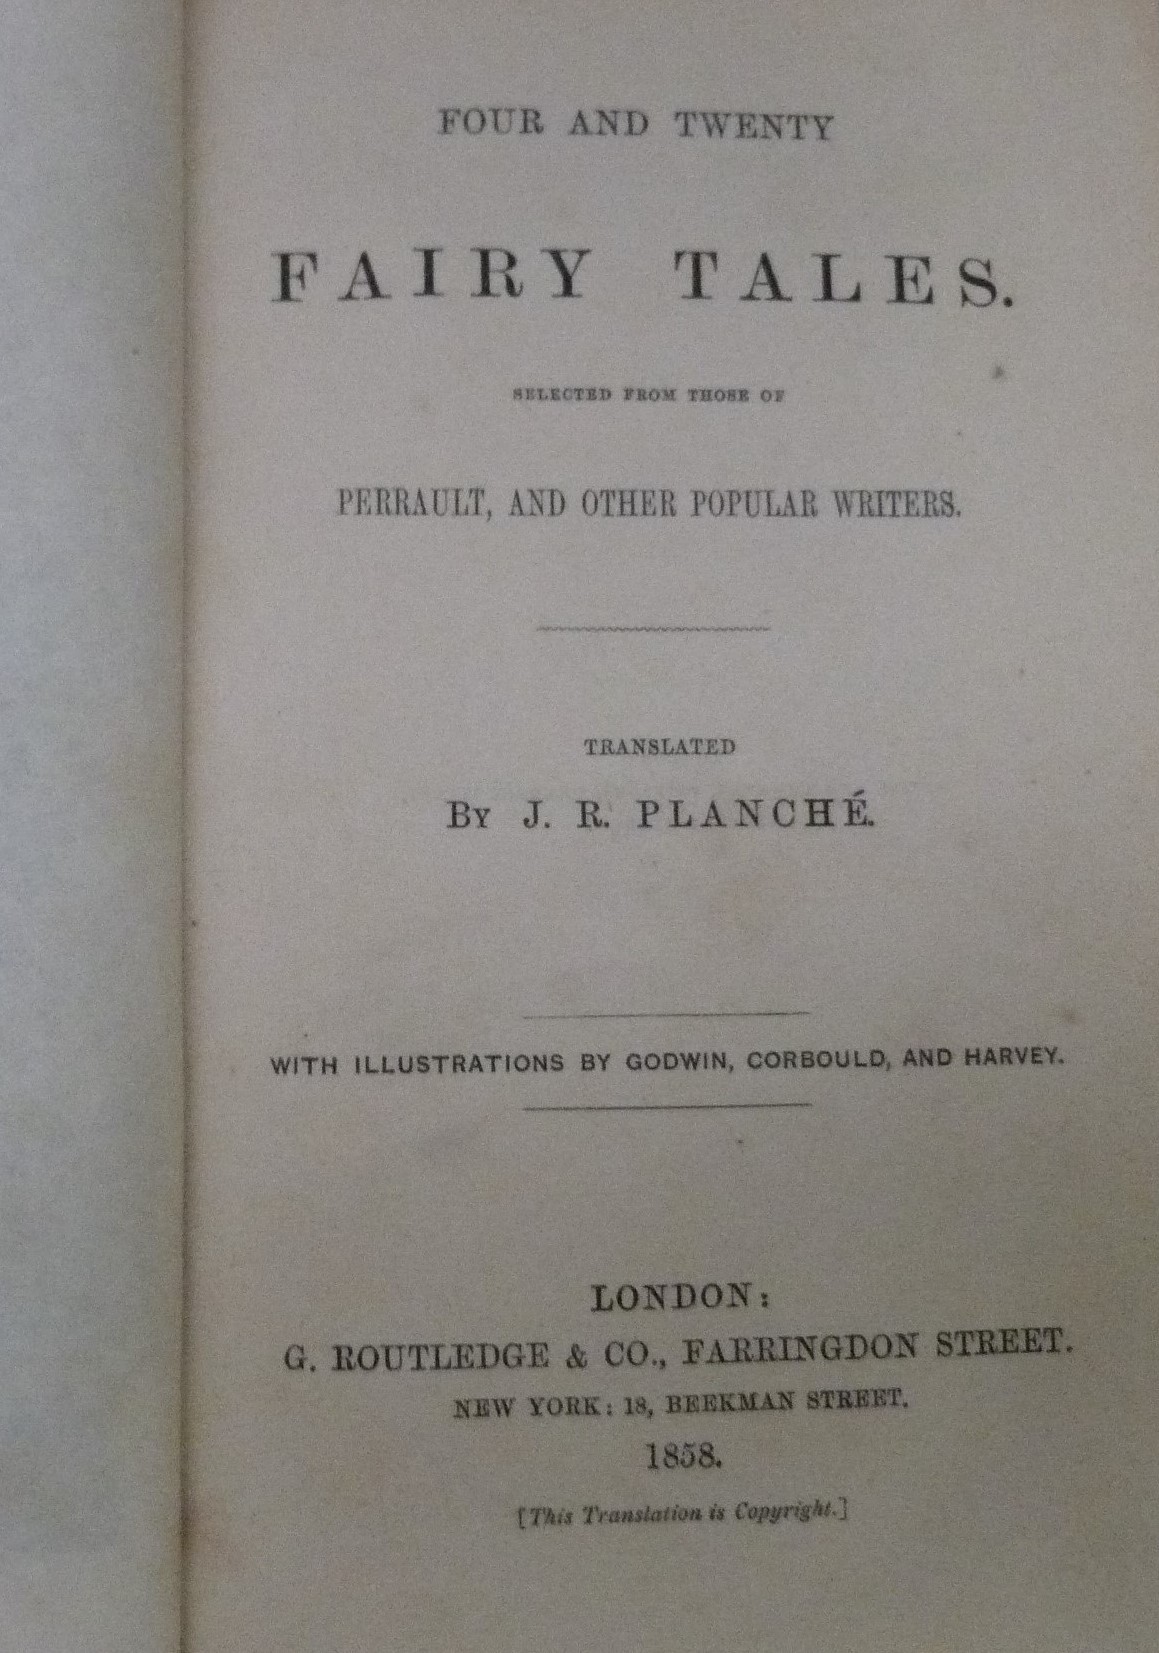 PLANCHÉ J. R. (Trans).  Four and Twenty Fairy Tales Selected from Those of Perrault, and Other - Image 2 of 2